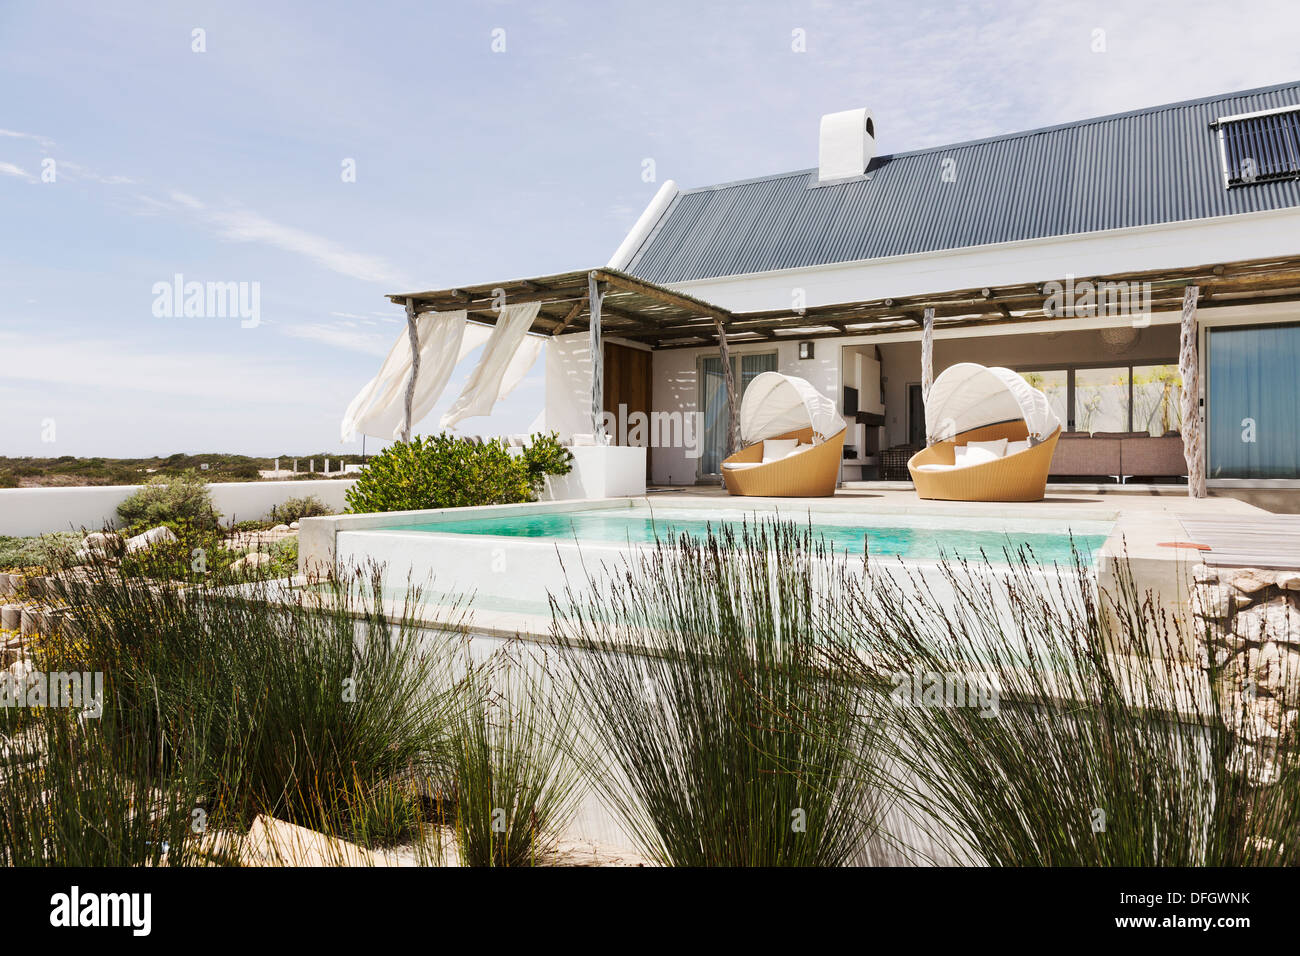 Swimming pool, chairs and patio of modern house Stock Photo